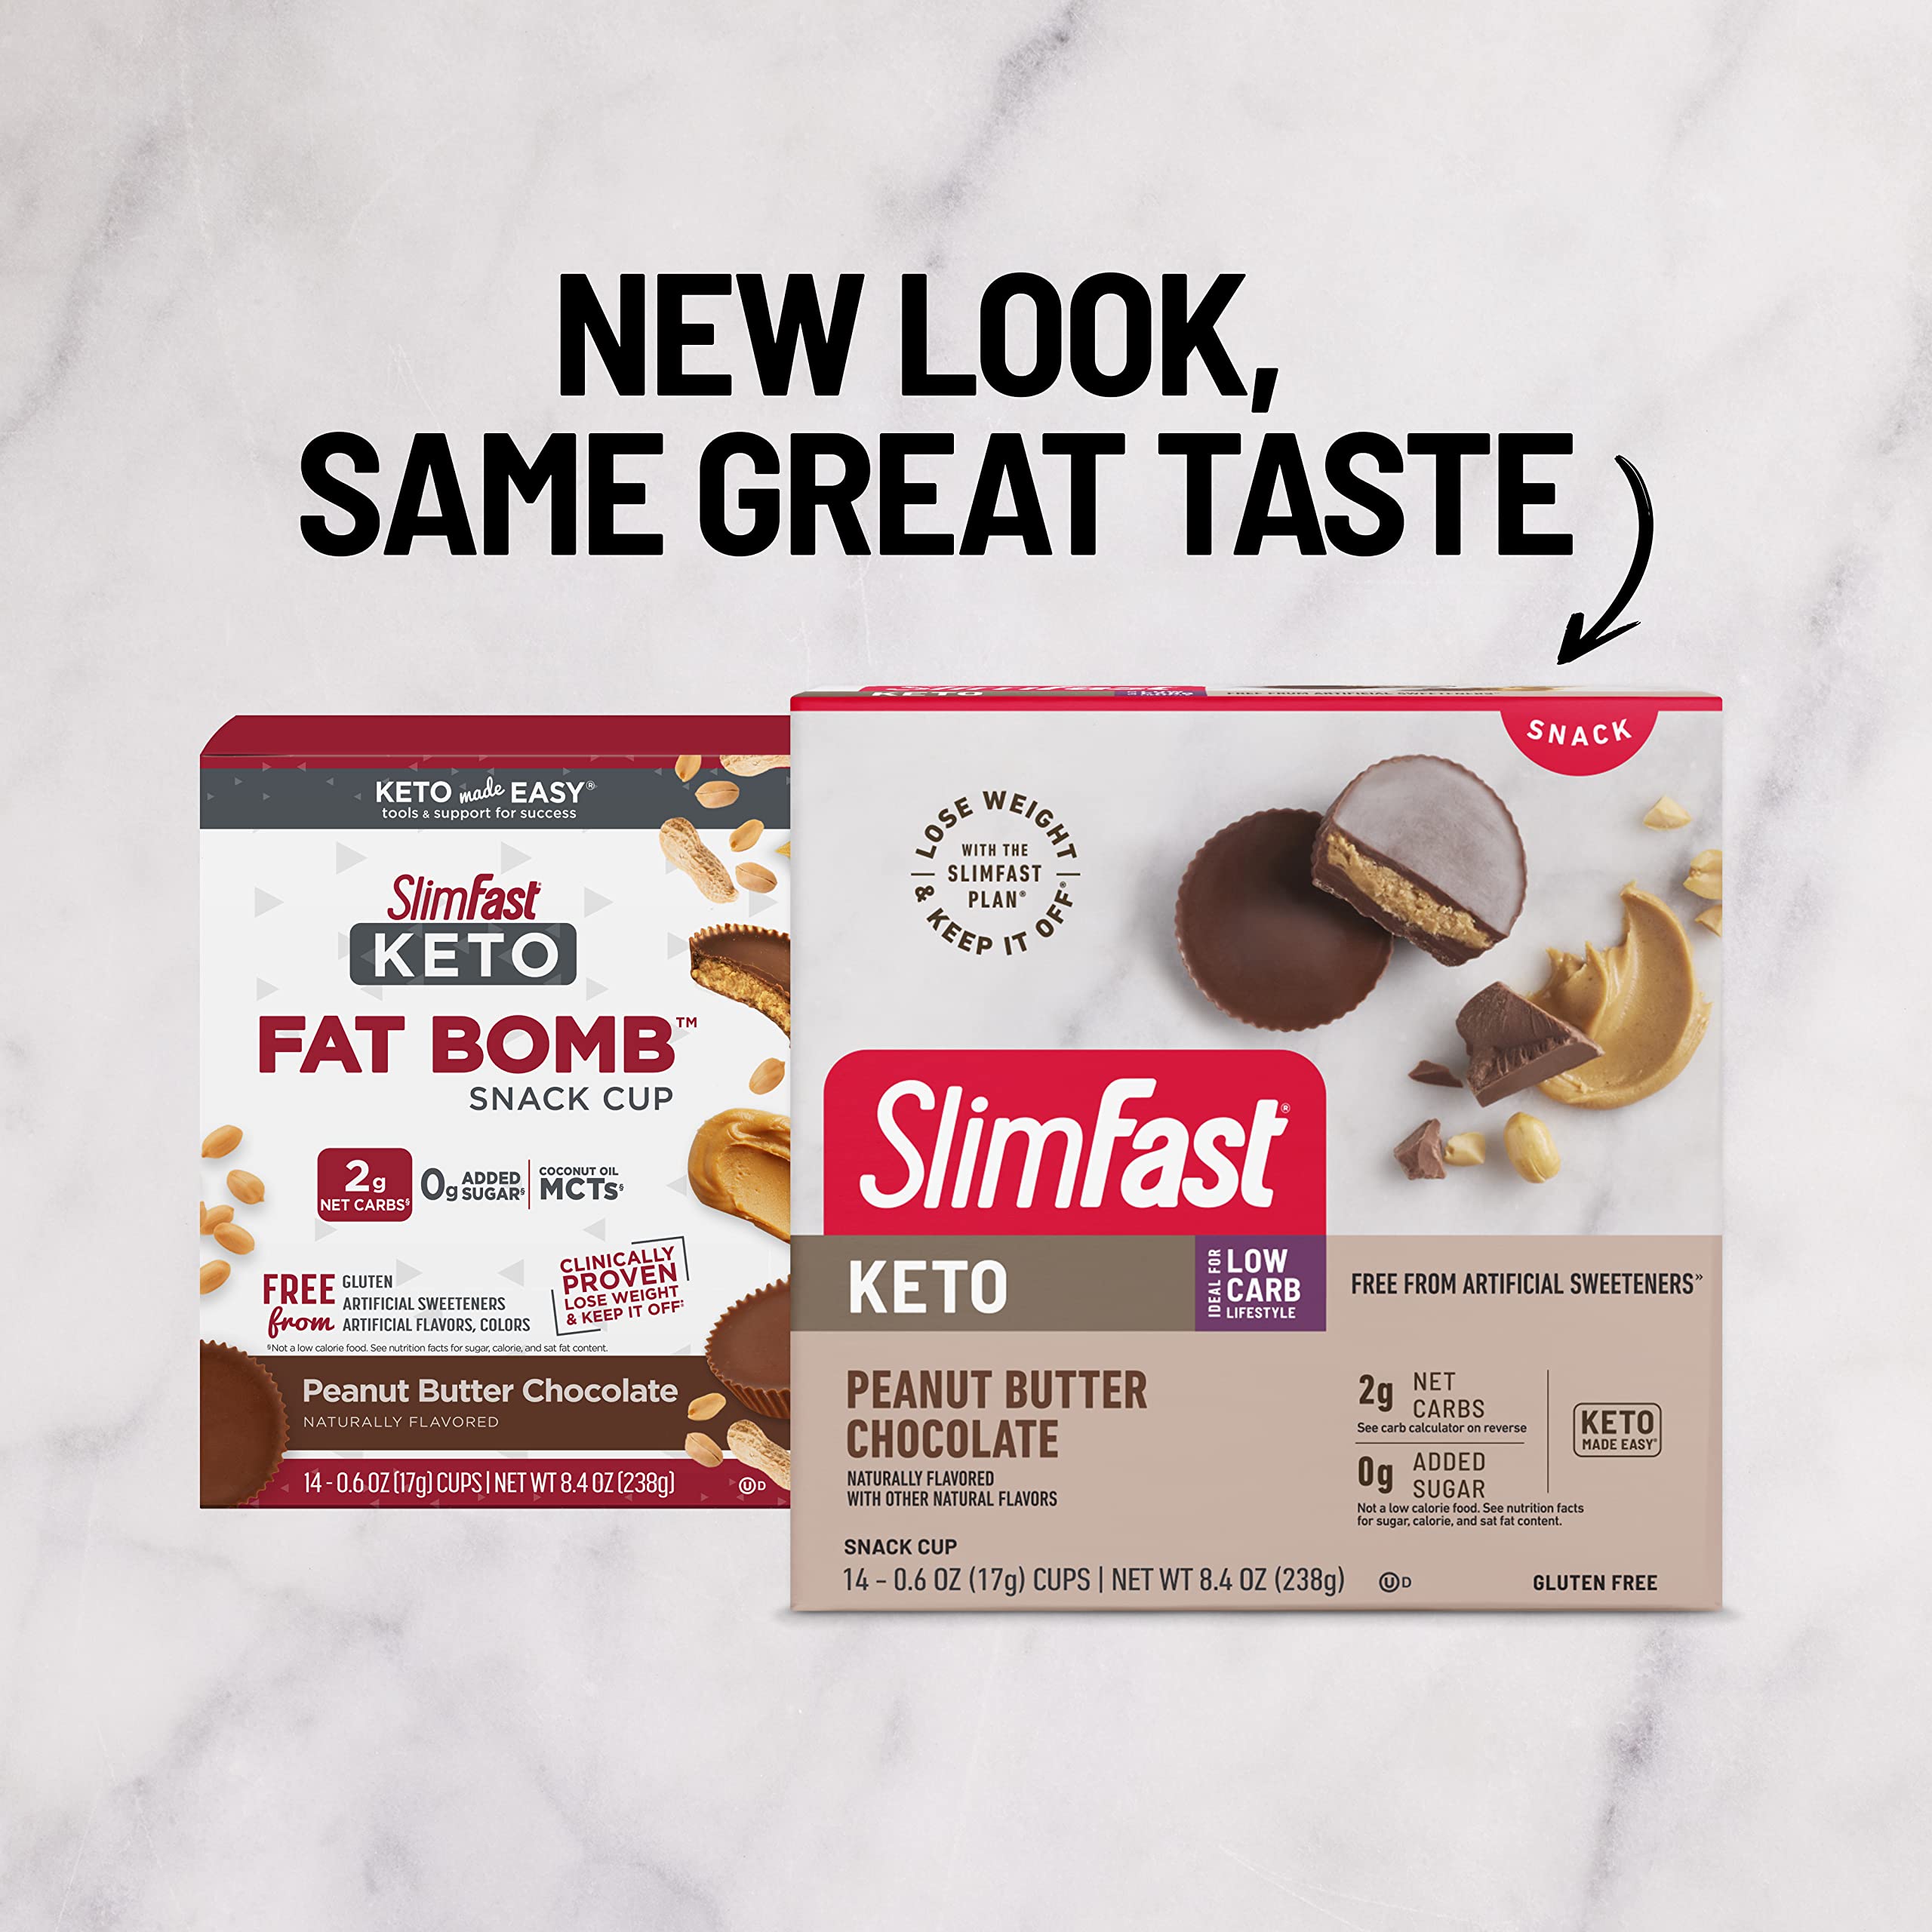 SlimFast Low Carb Chocolate Snacks, Keto Friendly for Weight Loss with 0g Added Sugar & 3g Fiber, Peanut Butter Chocolate, 14 Count Box (Packaging May Vary)